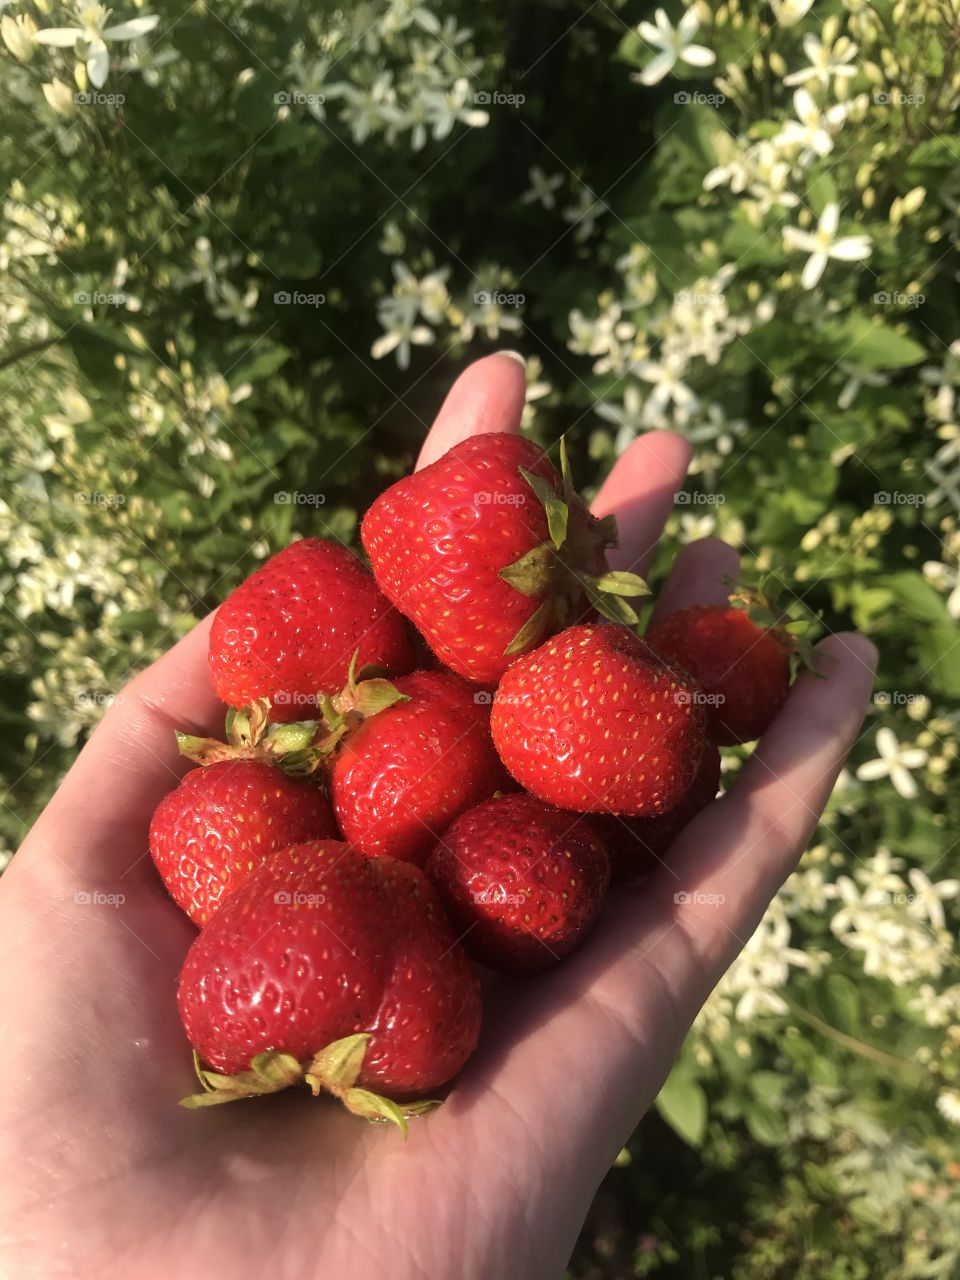 Ripe strawberries from the garden.